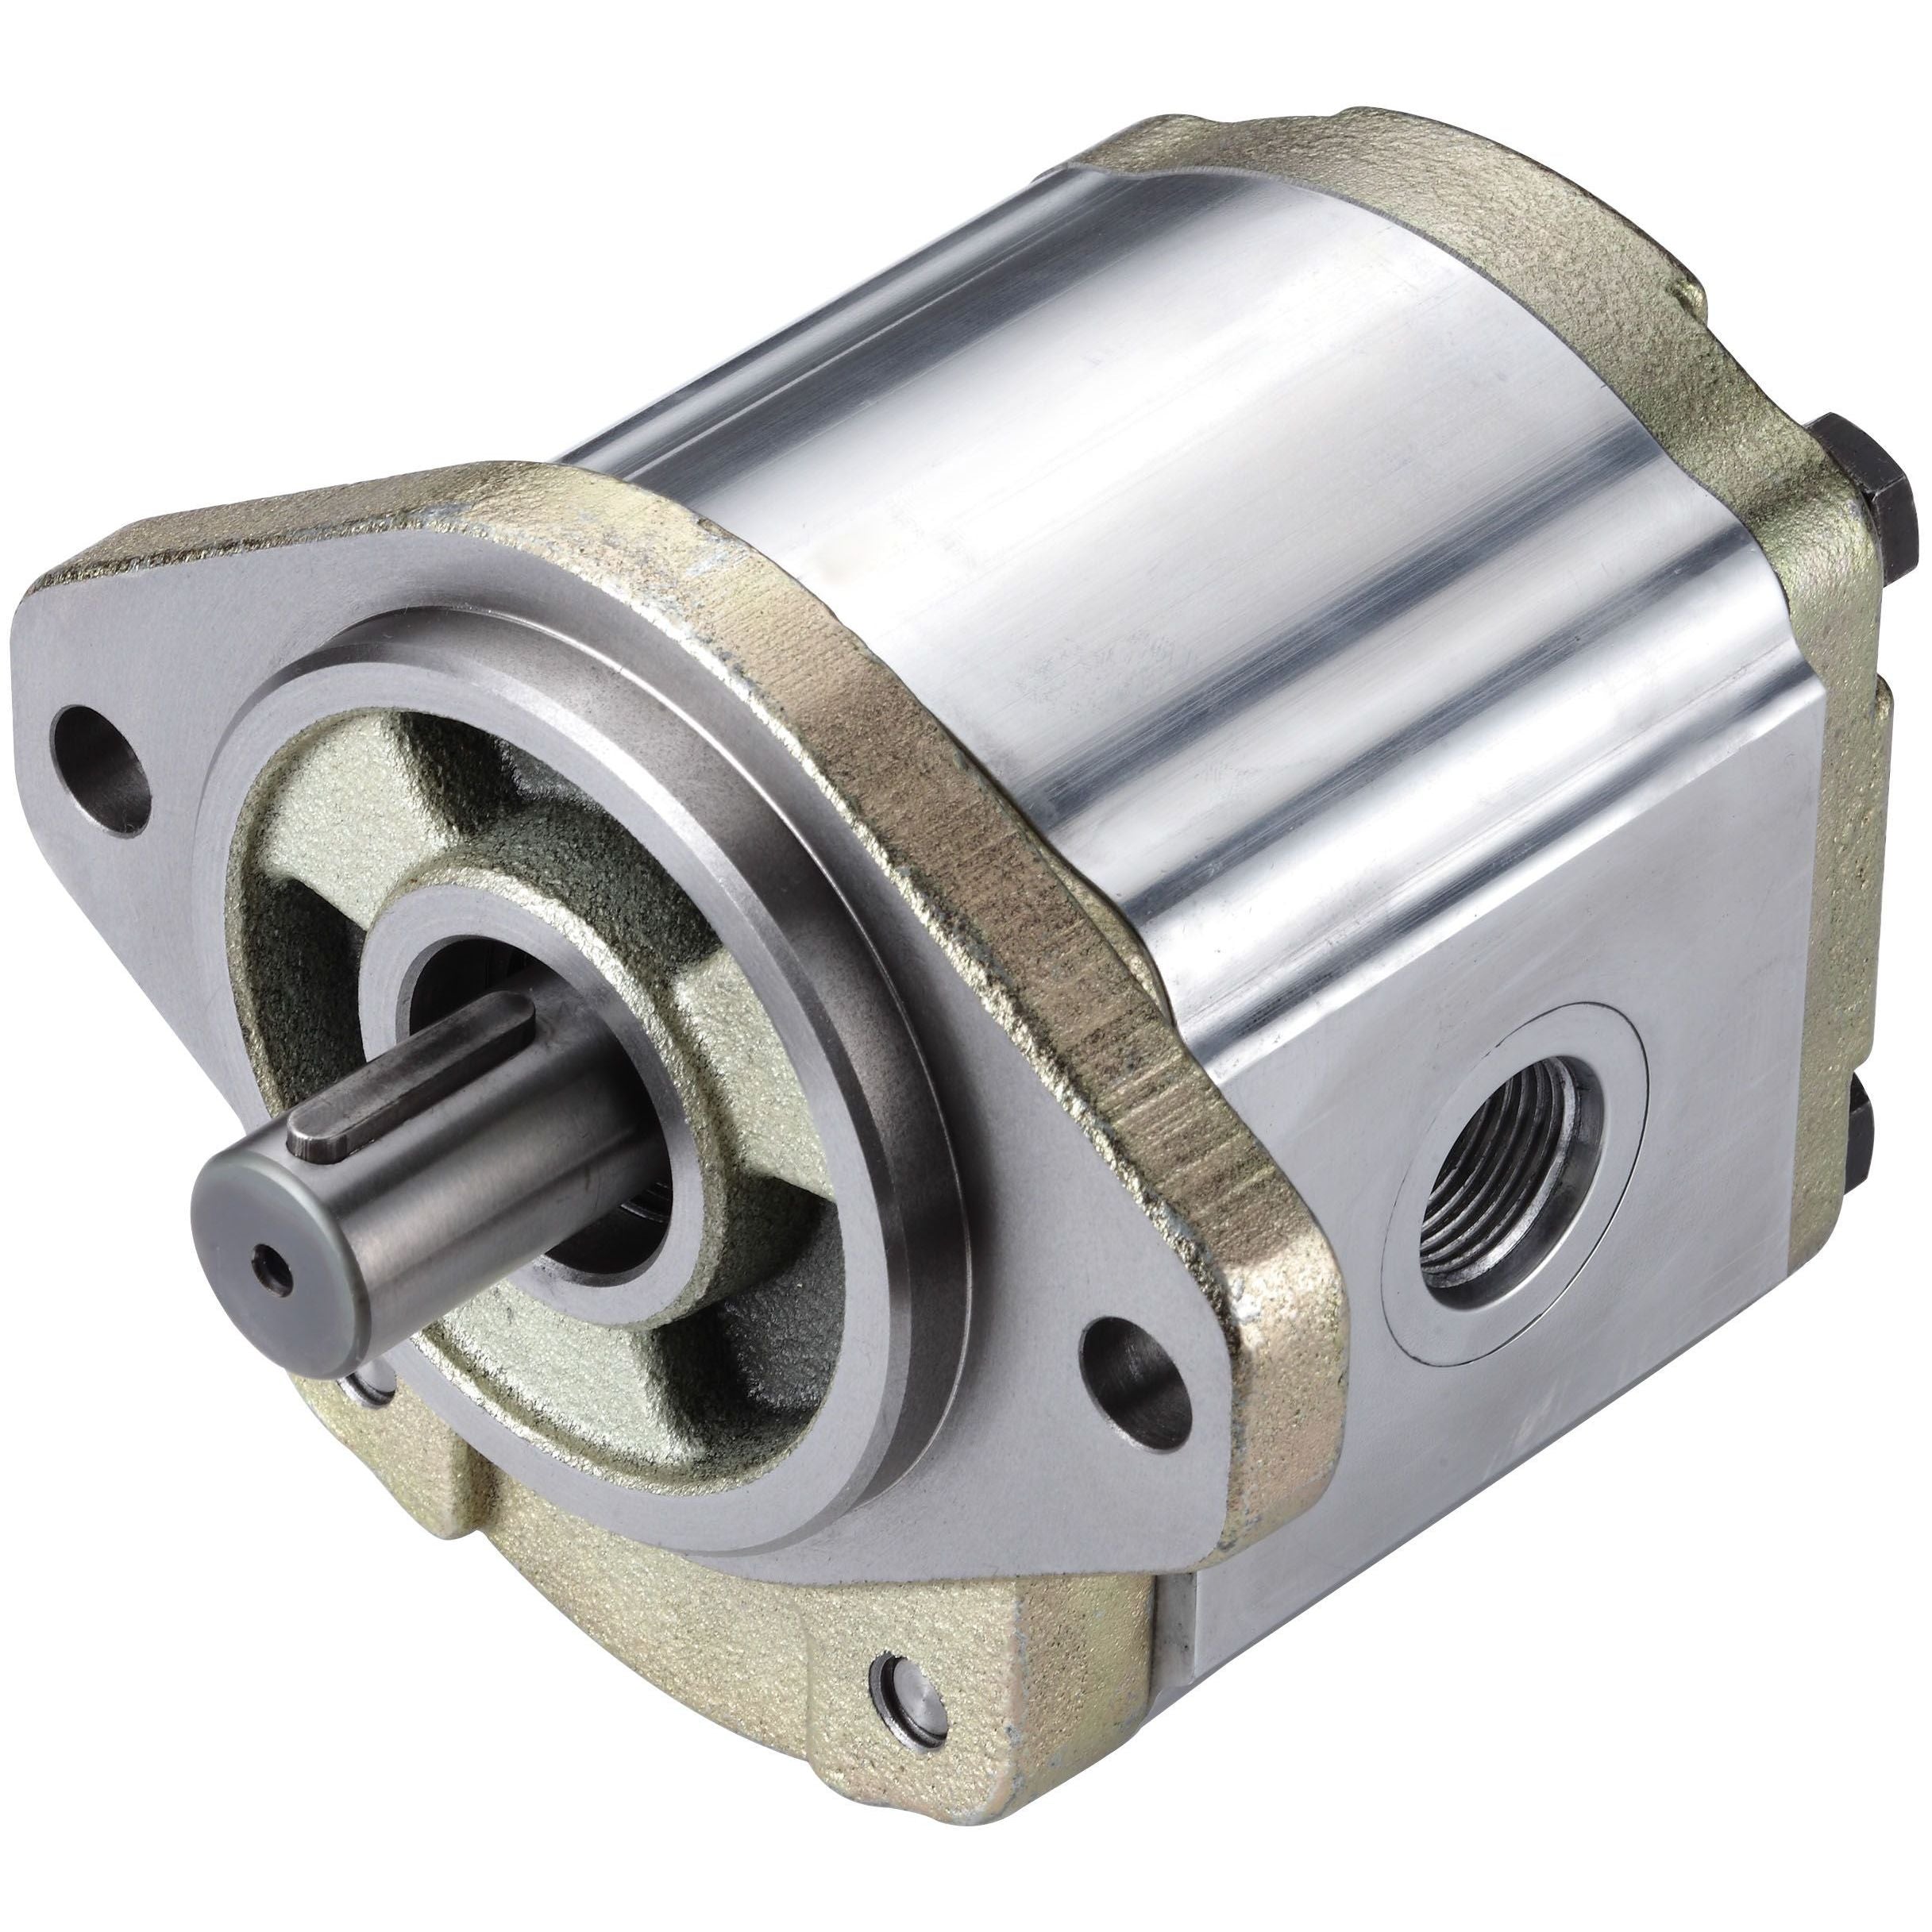 3GB8U290R : Honor Gear Pump, CW Rotation, 90cc (5.49in3), 42.8 GPM, 2000psi, 2000 RPM, #20 SAE (1.25") In, #12 SAE (3/4") Out, Splined Shaft 13-Tooth, 16/32 Pitch, SAE B 2-Bolt Mount